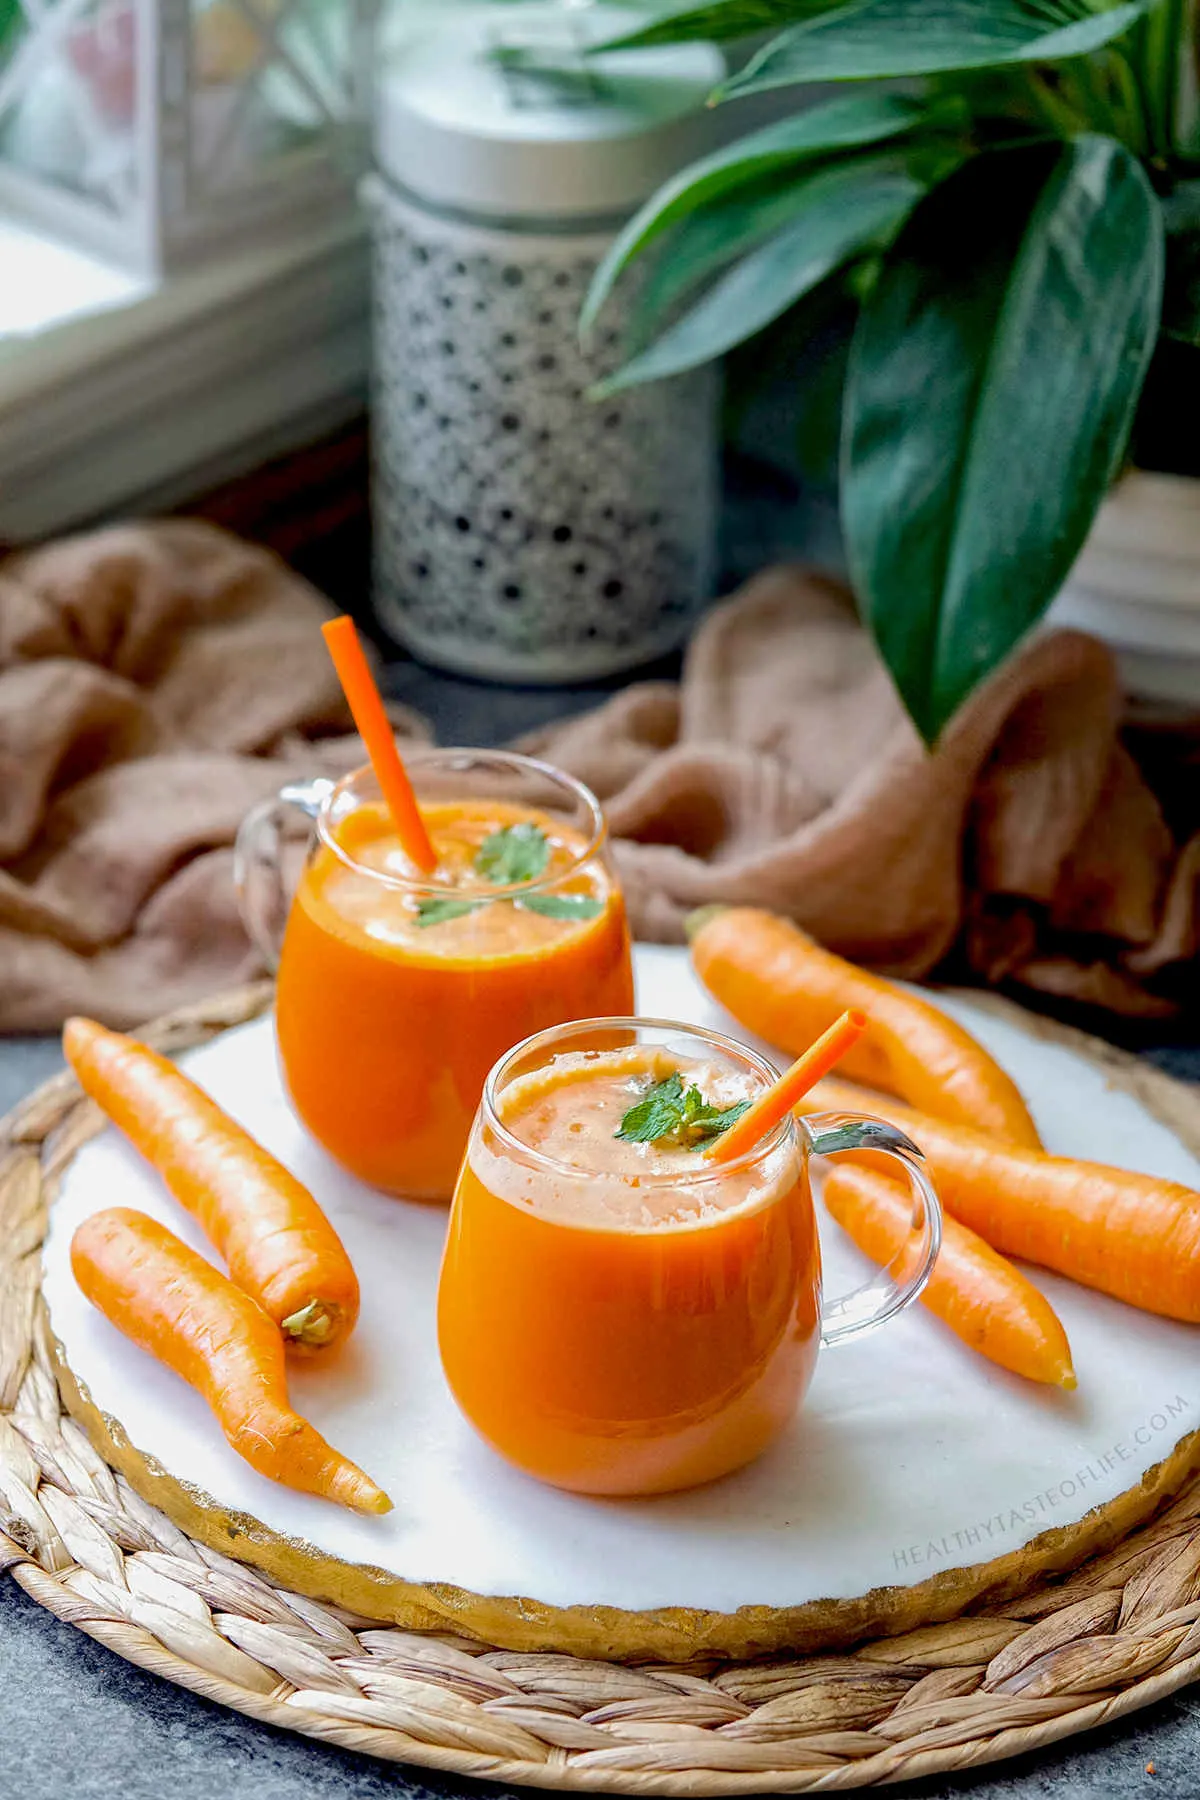 Carrot juicing - homemade carrot juice served in glass mugs. Recipe for carrot juice.